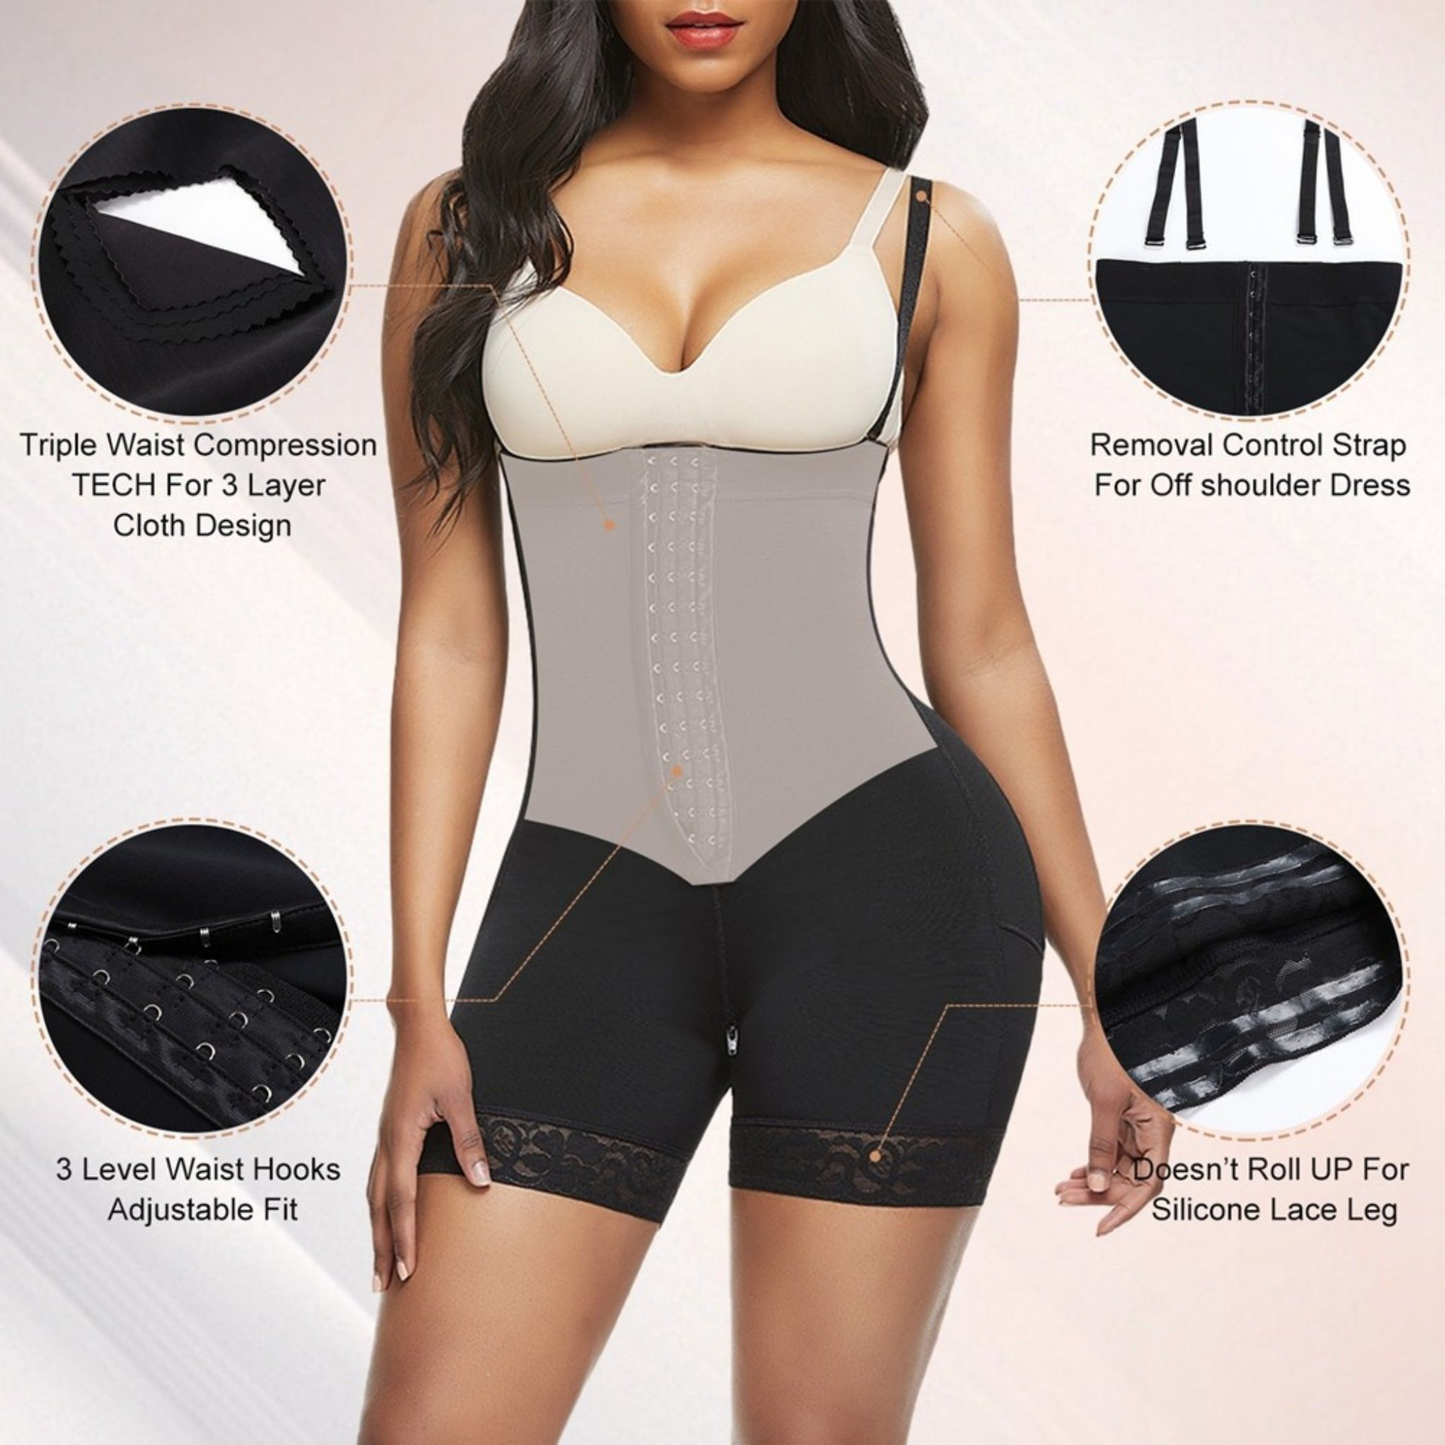 This high quality waist shapewear for women has a defined enhancement effect to help you trim your waist, make your thighs slimmer, lift your buttocks, and compress your belly. Targeted control can help you reshape your curves and keep a beautiful hourglass figure all the time.